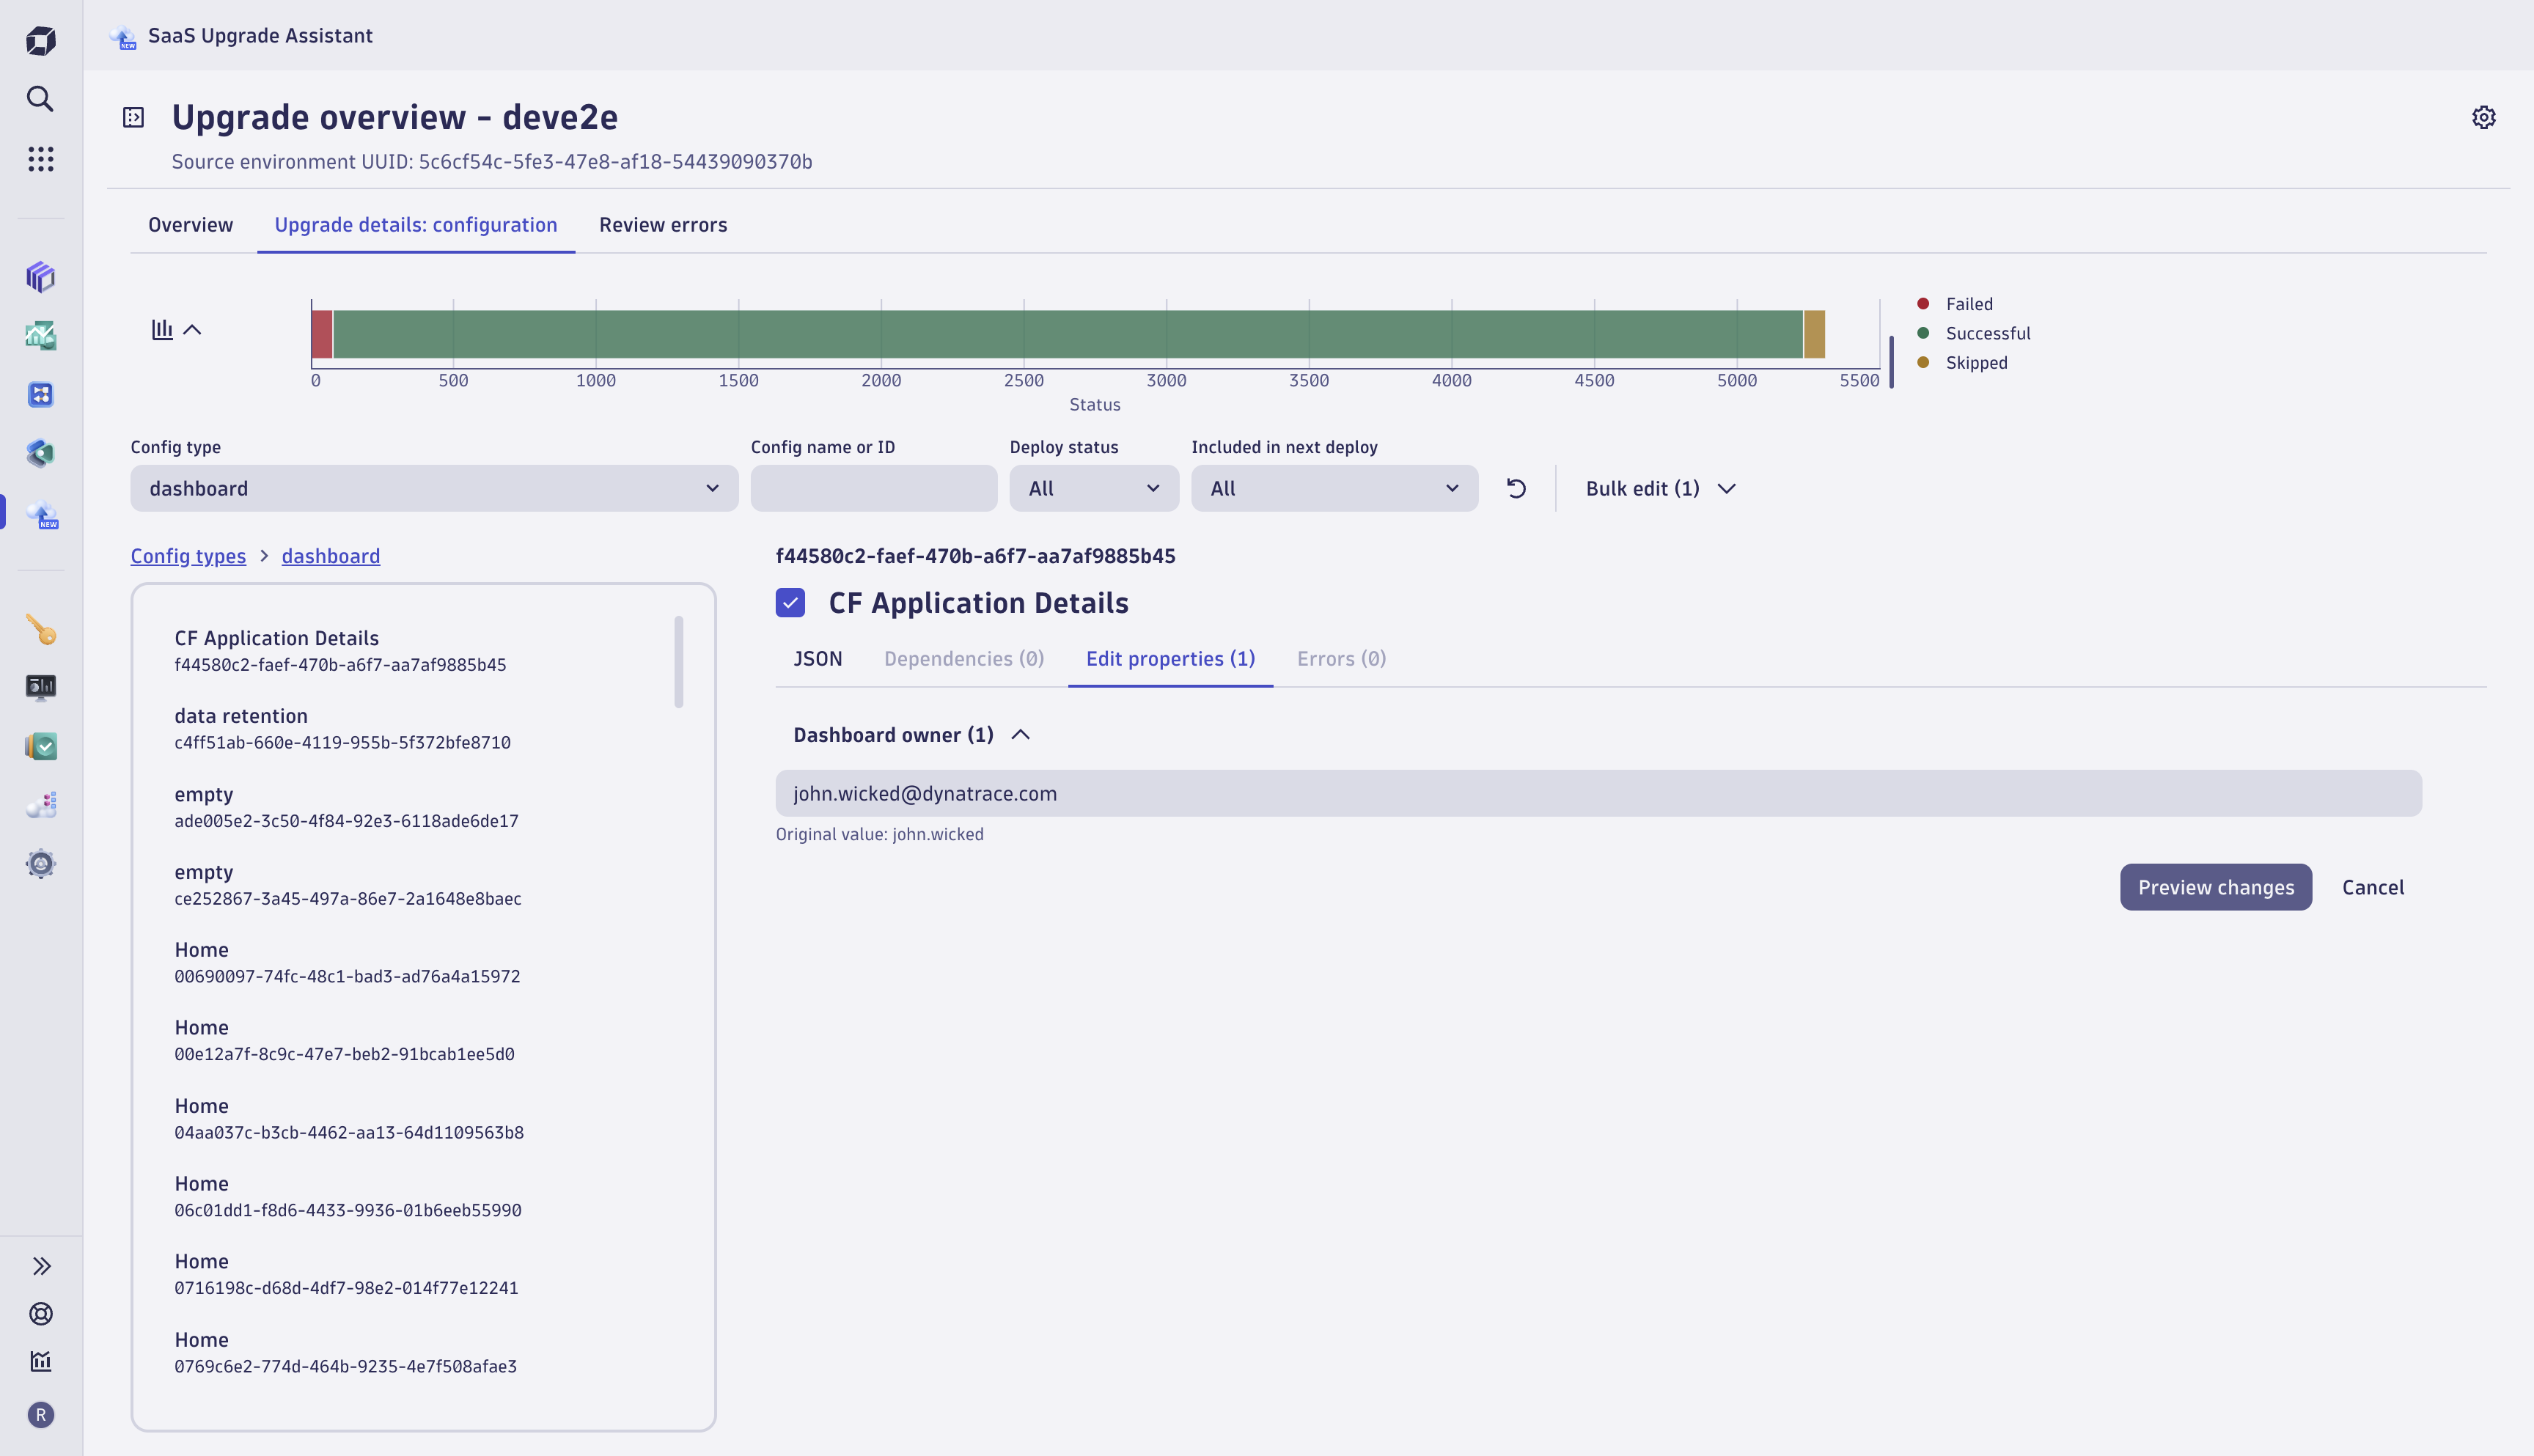 Users can update all dashboard owners to match new user identifiers in the new SaaS environment. Preview mode allows one to verify the migration configuration.